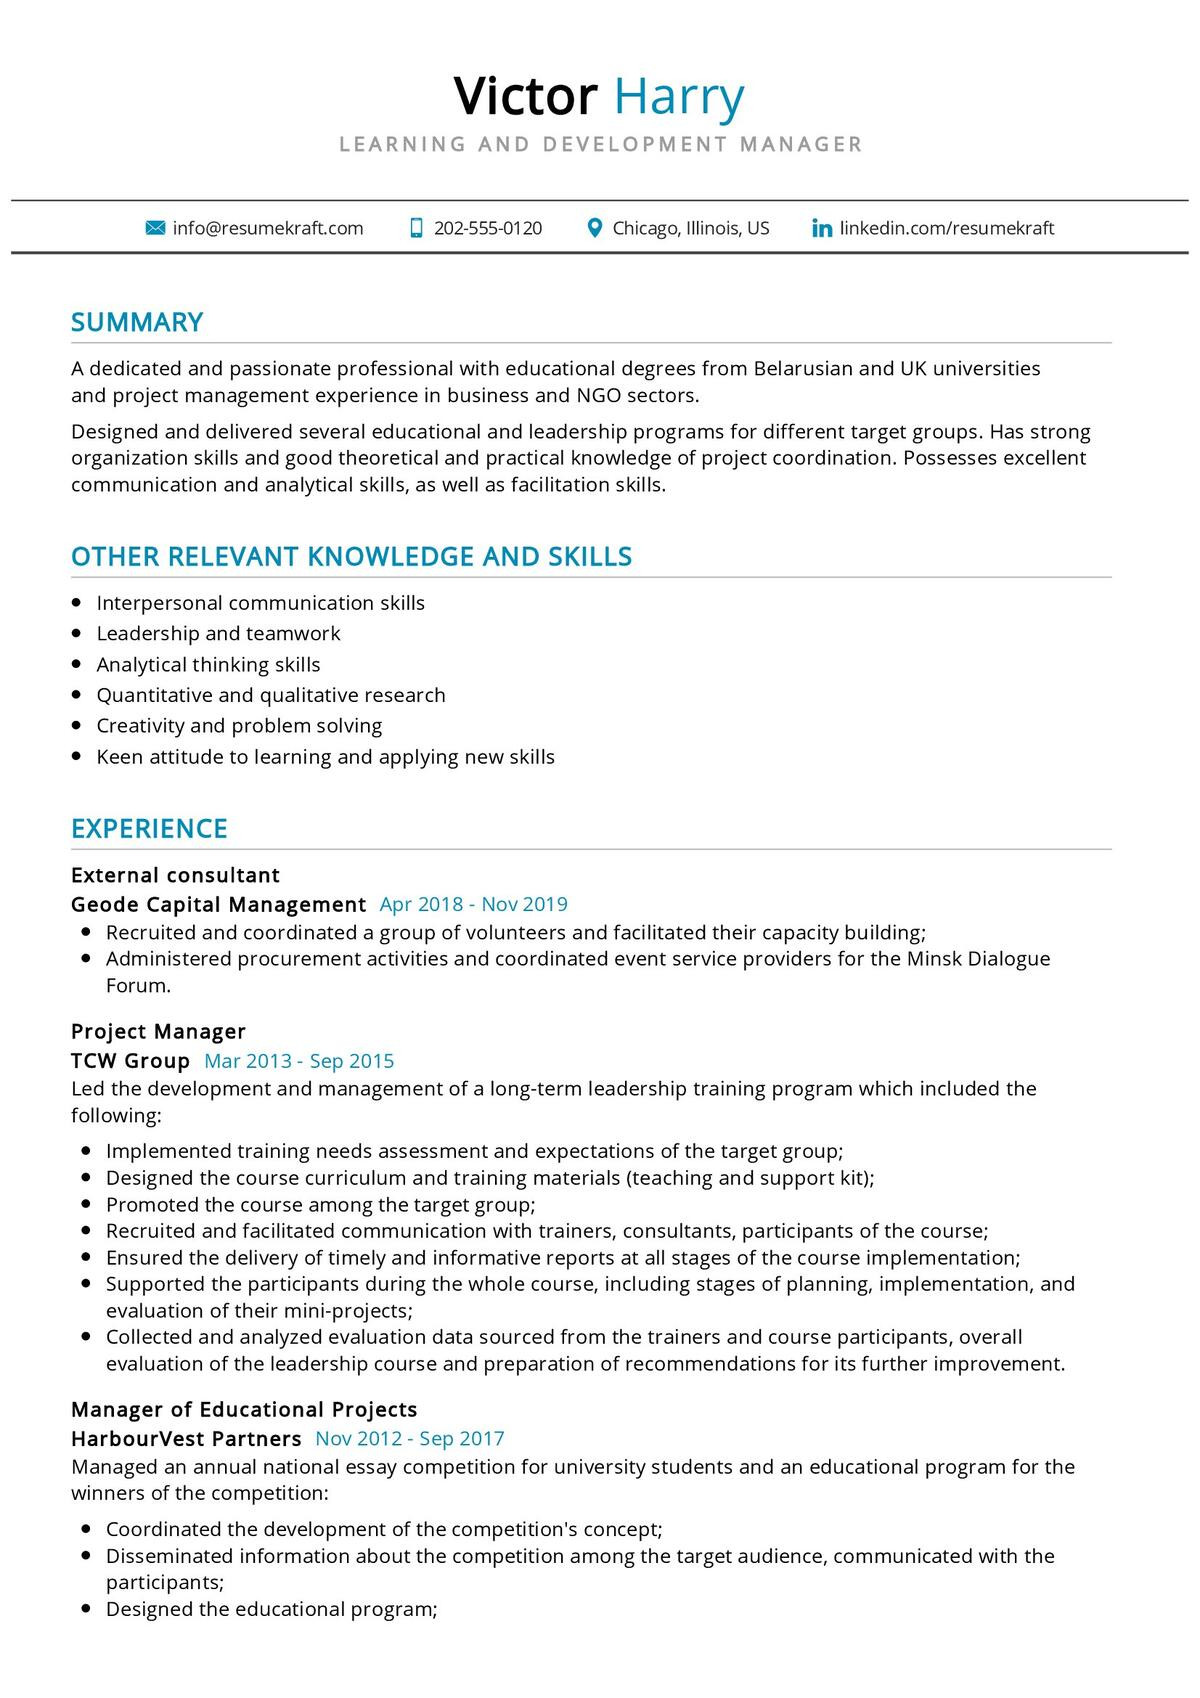 Training and Development Manager Resume Samples Learning and Development Manager Resume 2021 Writing Guide …